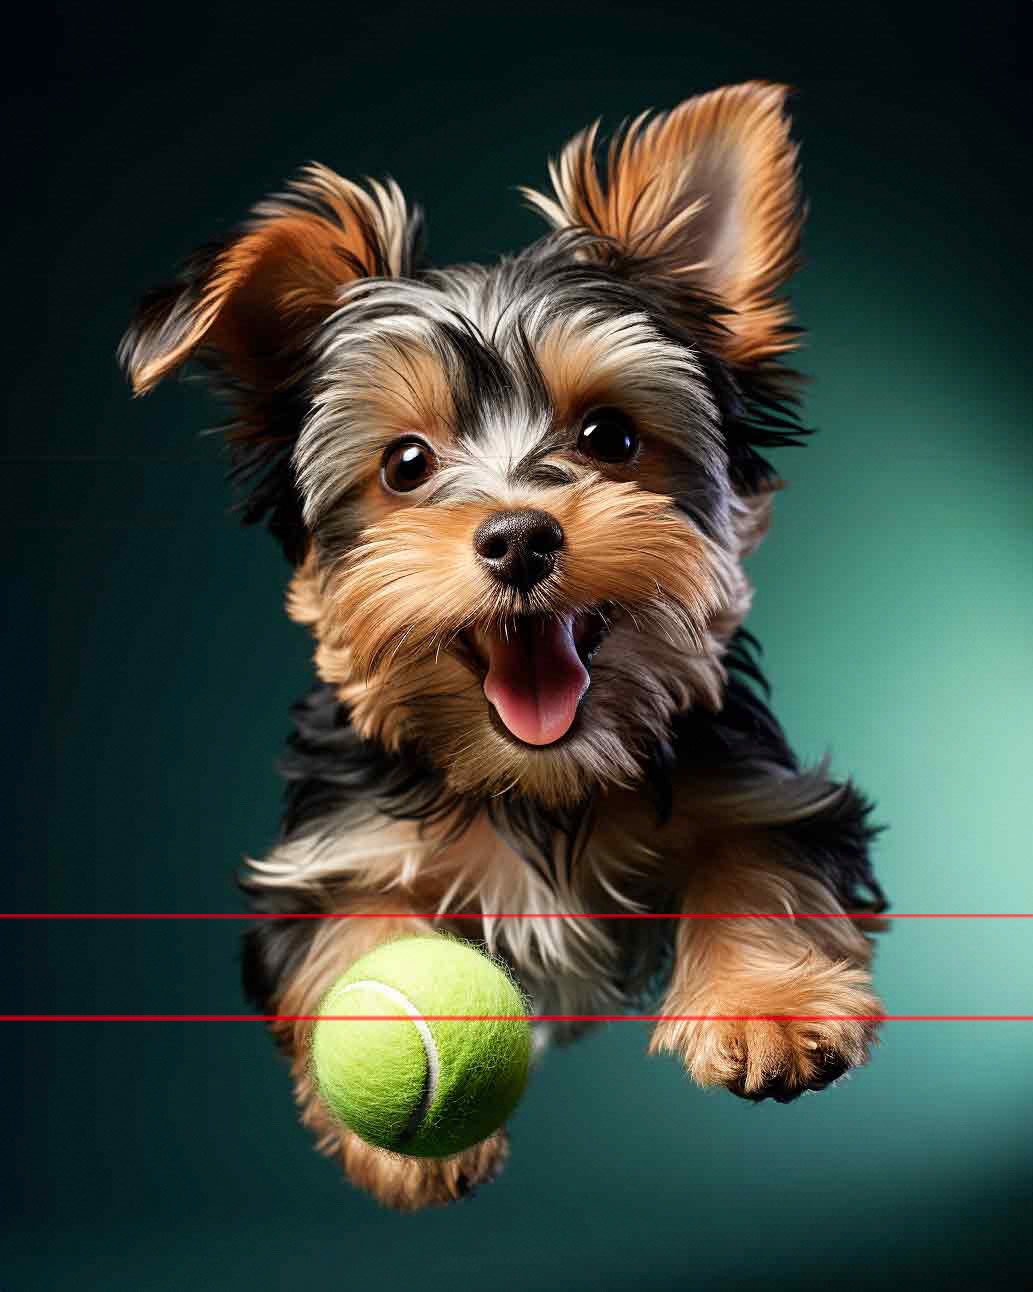 A picture of an excited Yorkie puppy is mid-jump, facing the viewer with its mouth open and tongue slightly out, suggesting a playful expression. The Yorkshire Terrier's paws are reaching forward, touching a green tennis ball. The background is a gradient of dark green to light green.